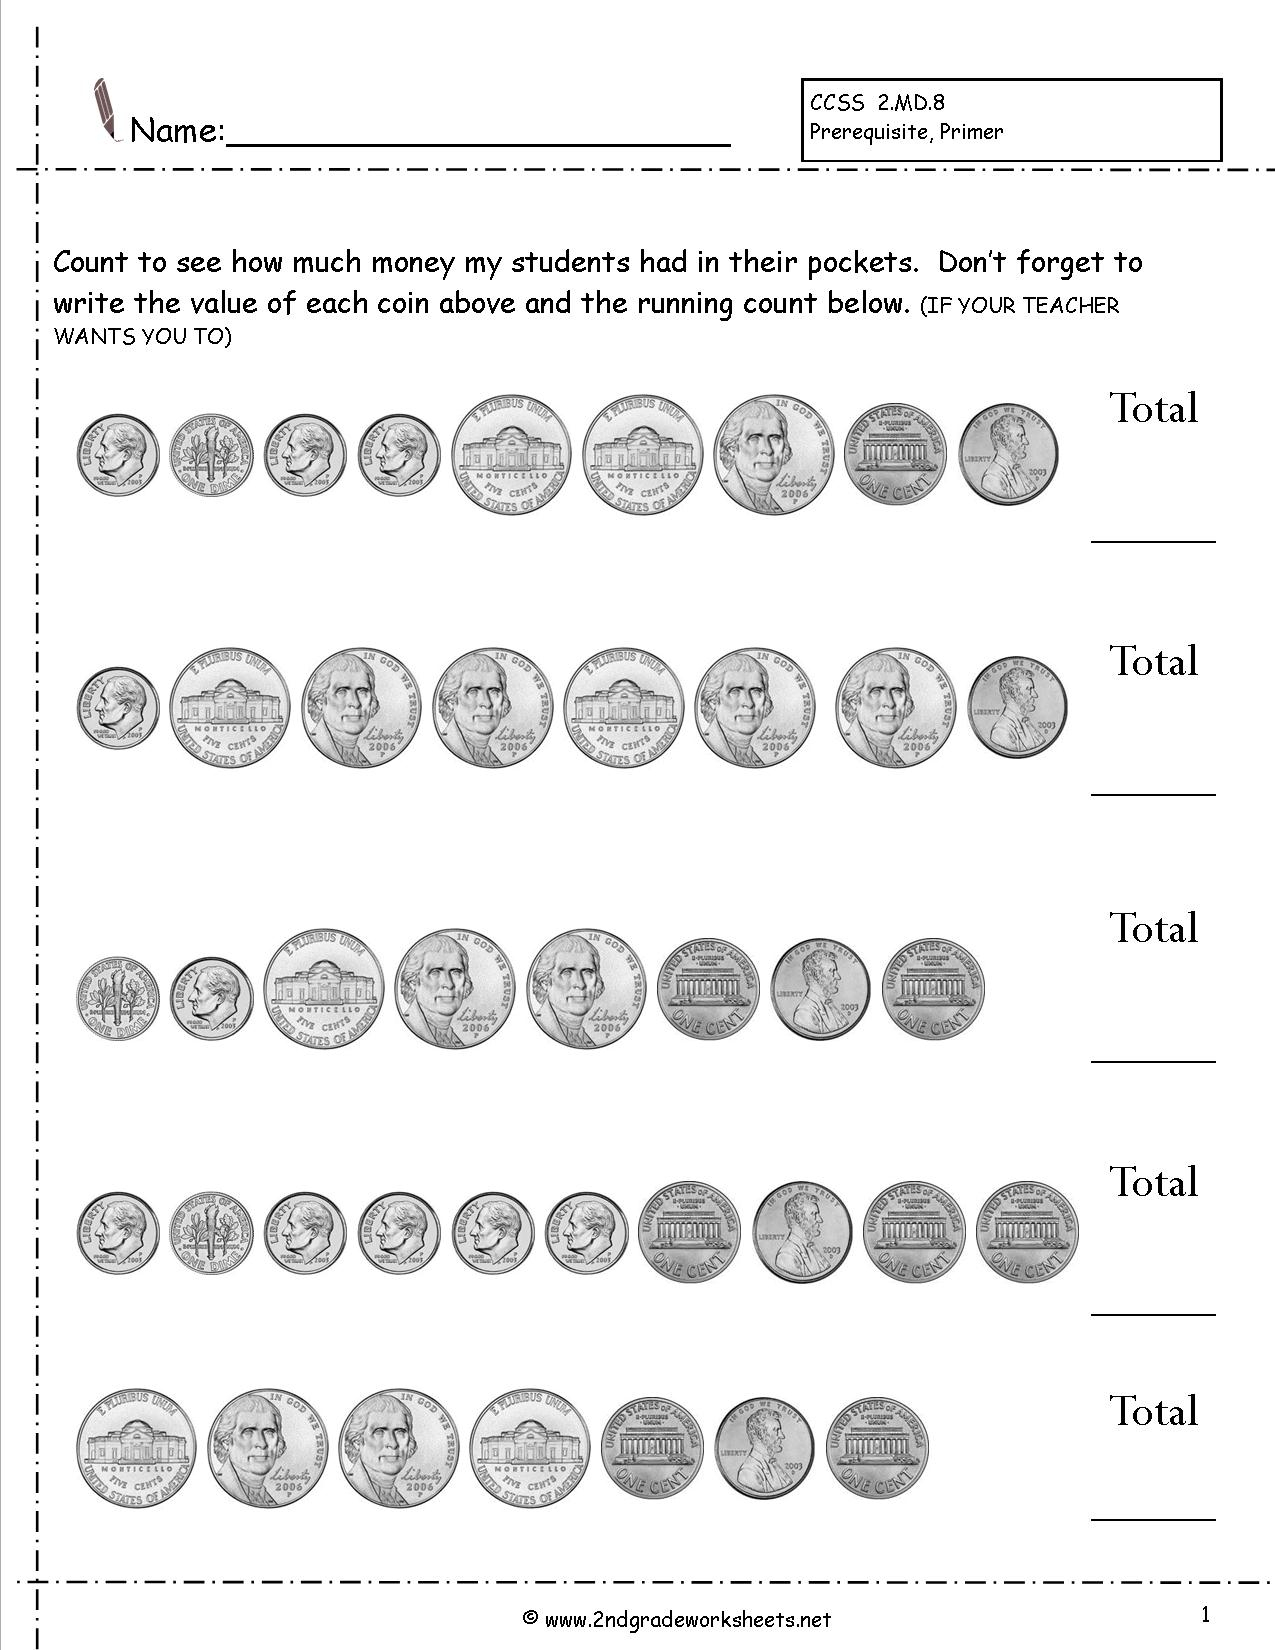 Counting Coins And Money Worksheets And Printouts - Free Printable Counting Money Worksheets For 2Nd Grade